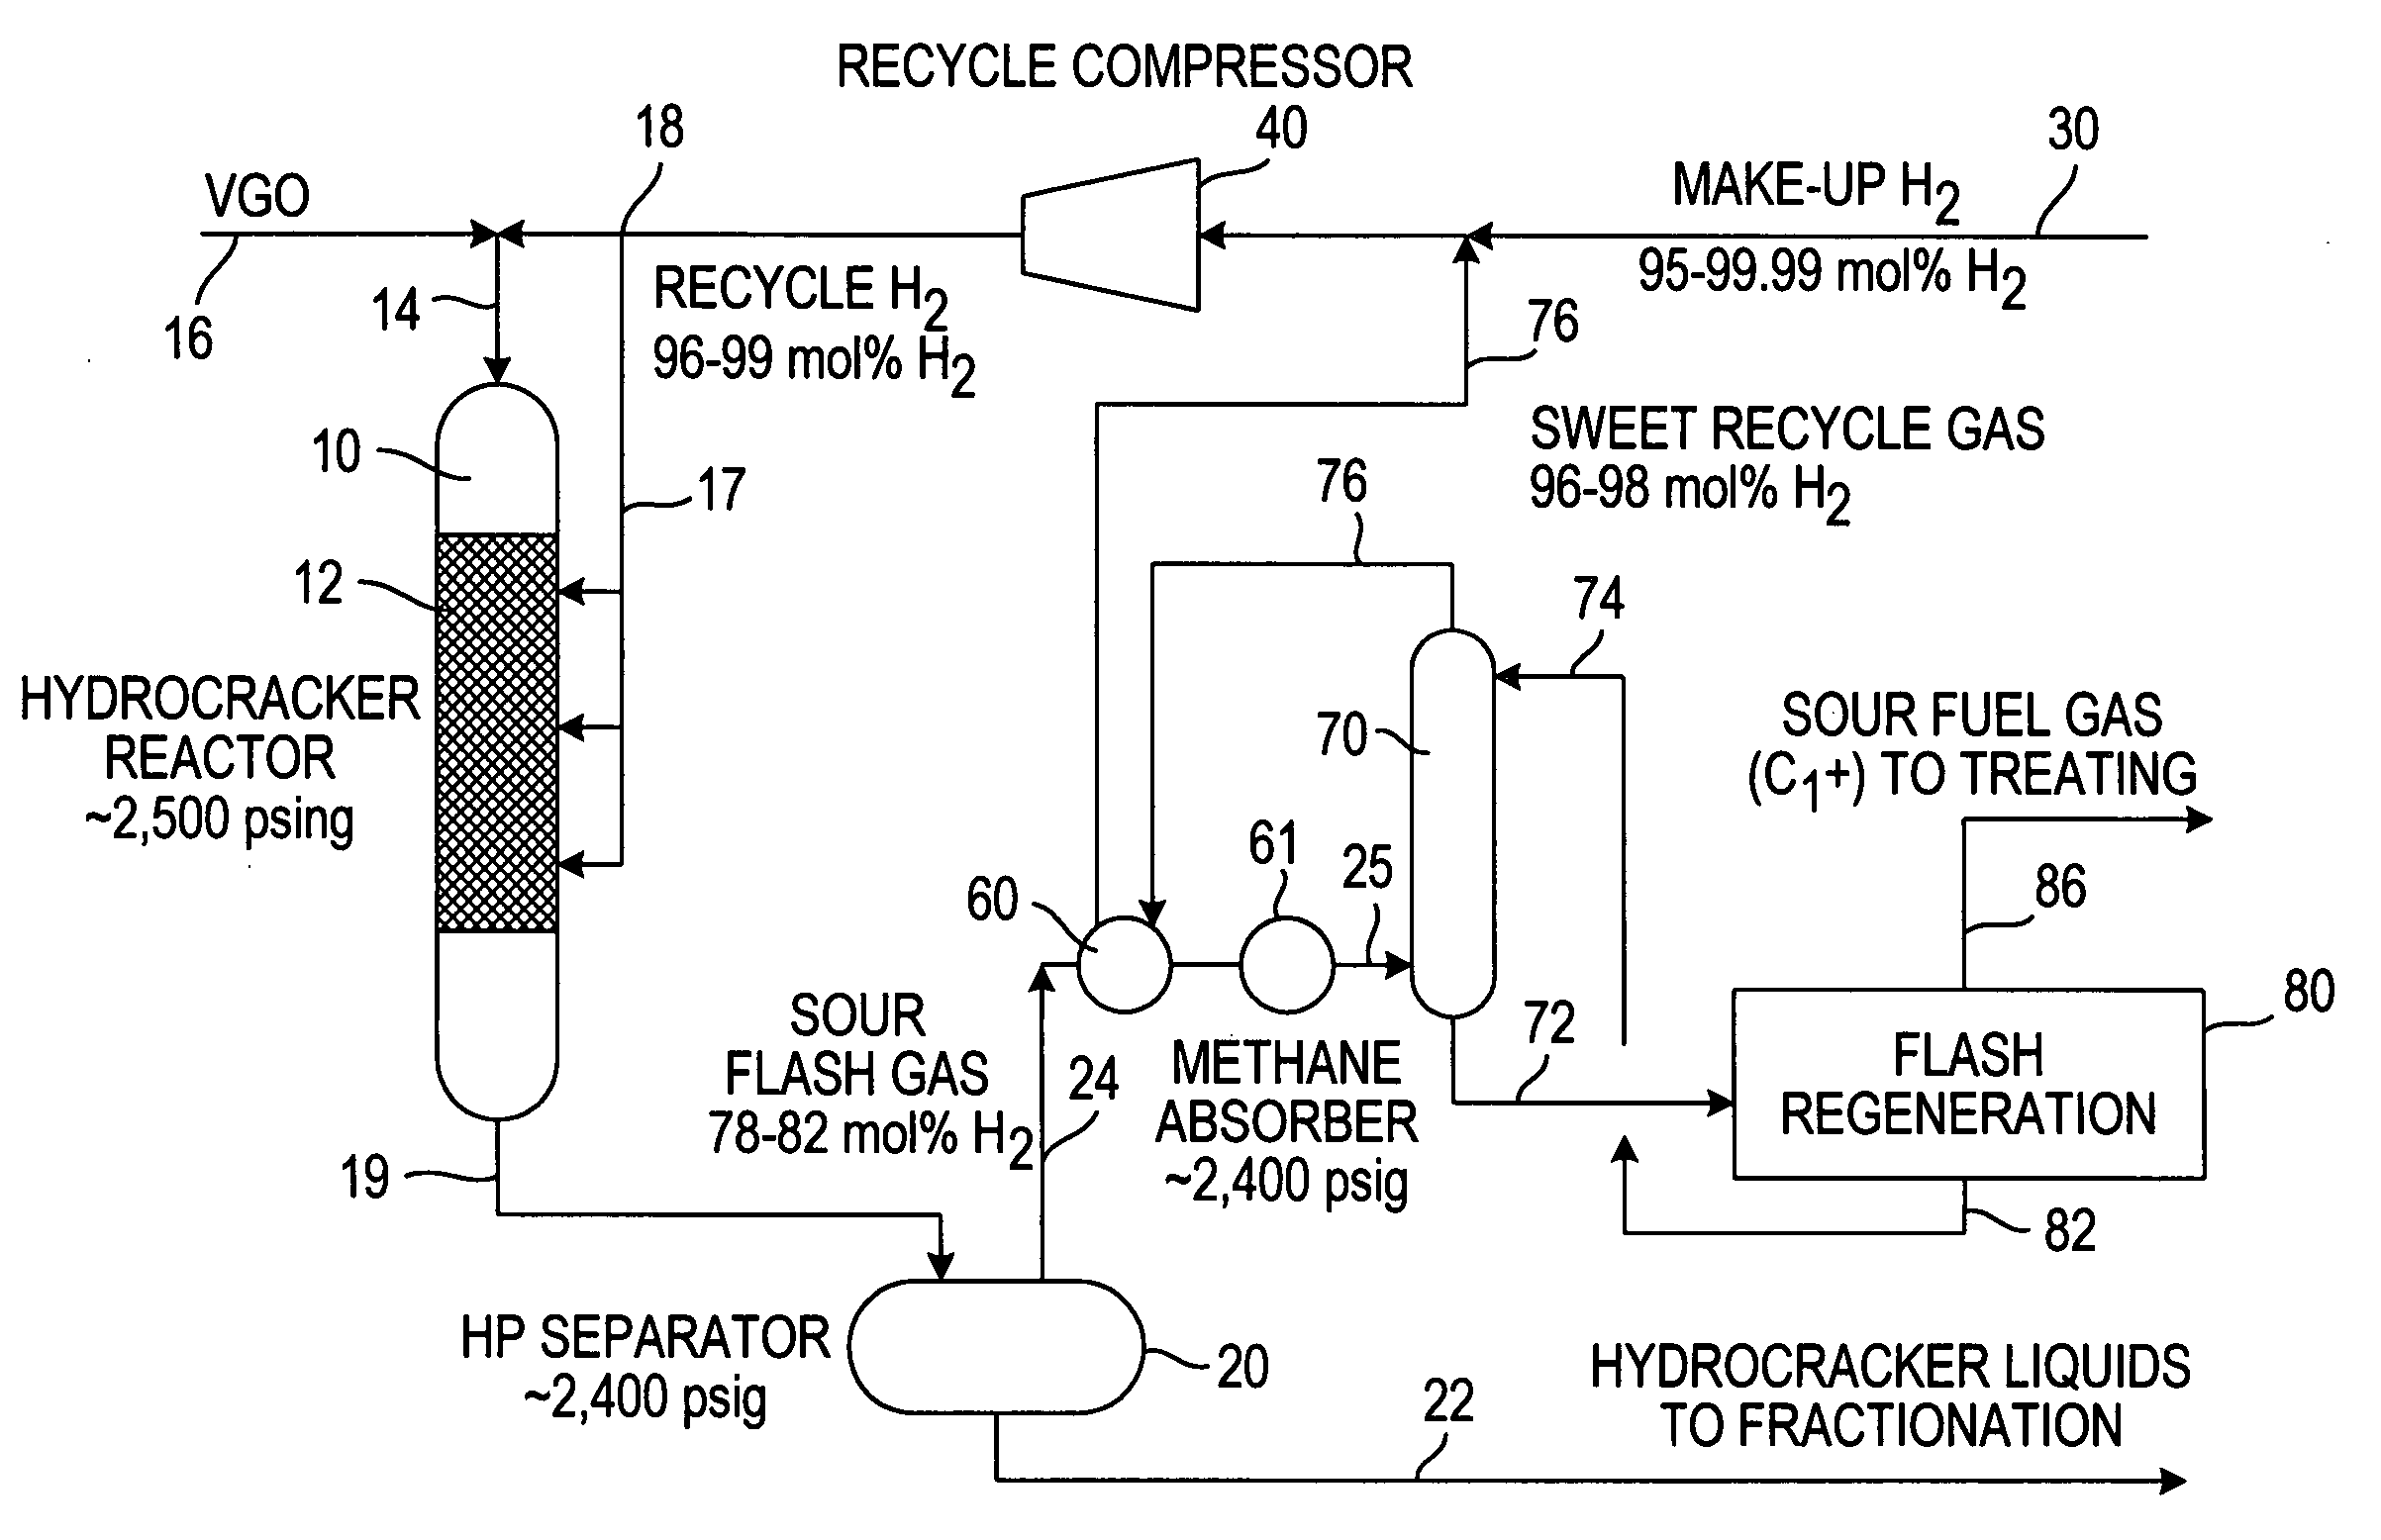 Hydrogen purification for make-up gas in hydroprocessing processes